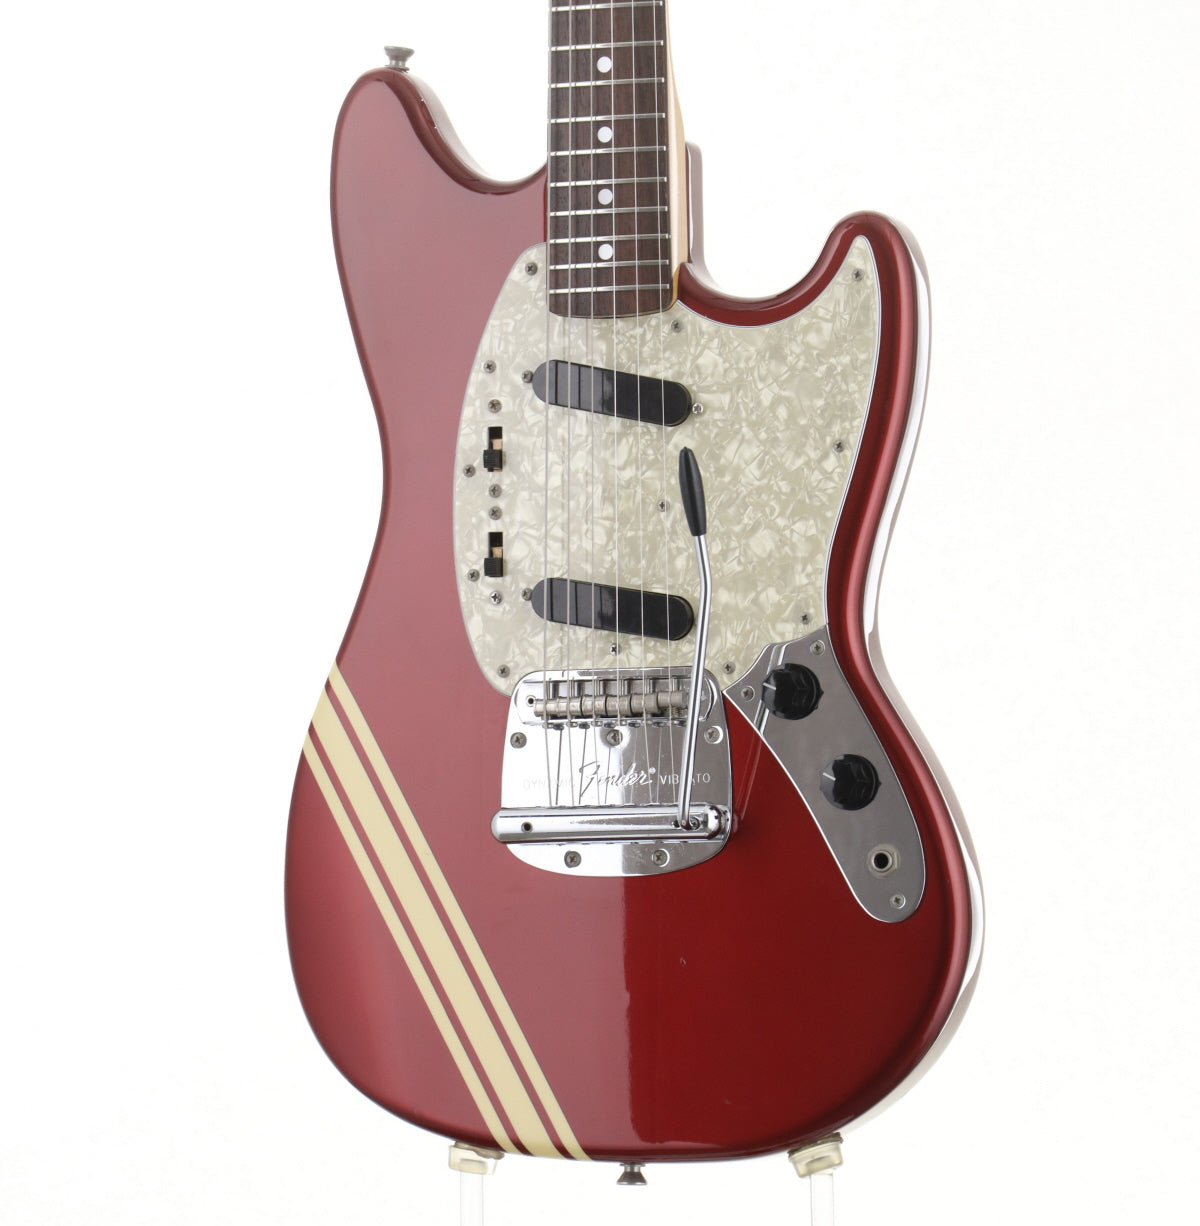 USED FENDER JAPAN / MG73-78CO OCR Old Candy Apple Red – Ishibashi 